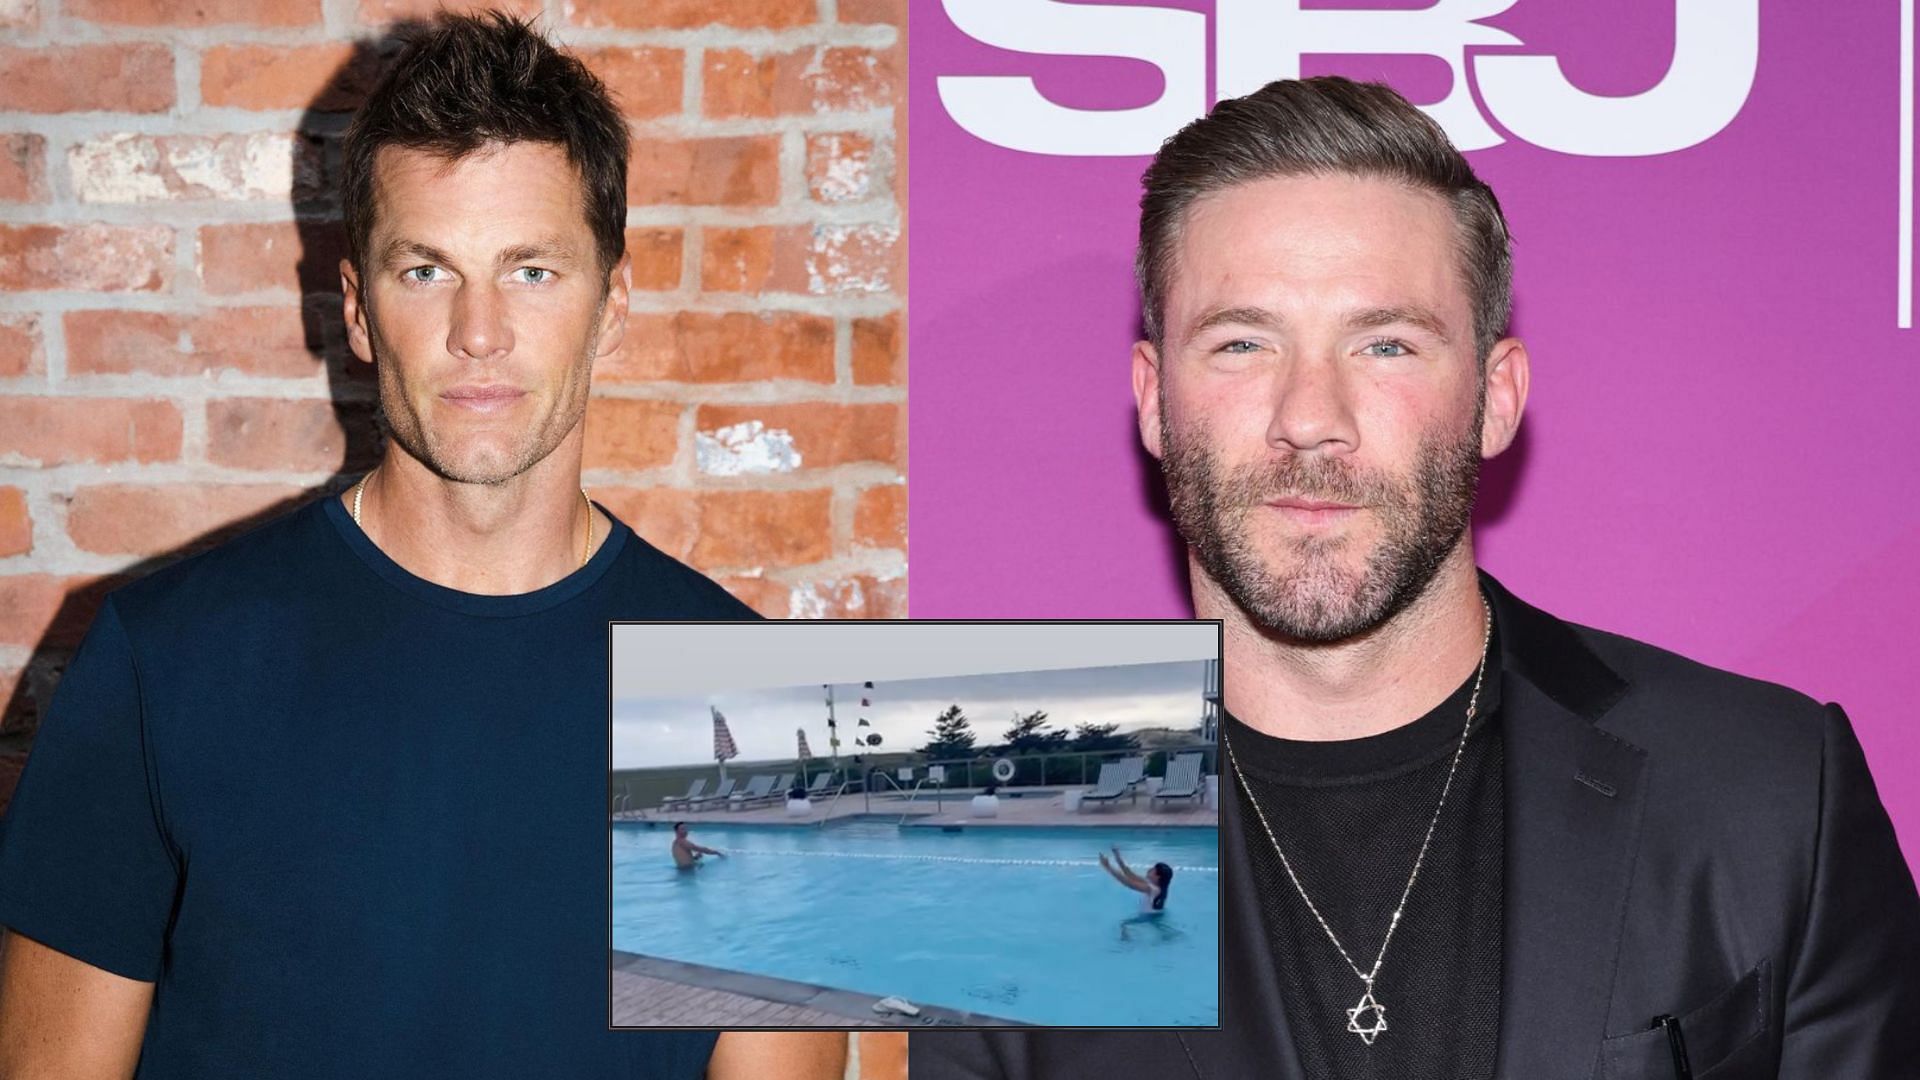 Tom Brady (L) is on vacation with his daughter Vivian (C) looking like Julian Edelman (R)